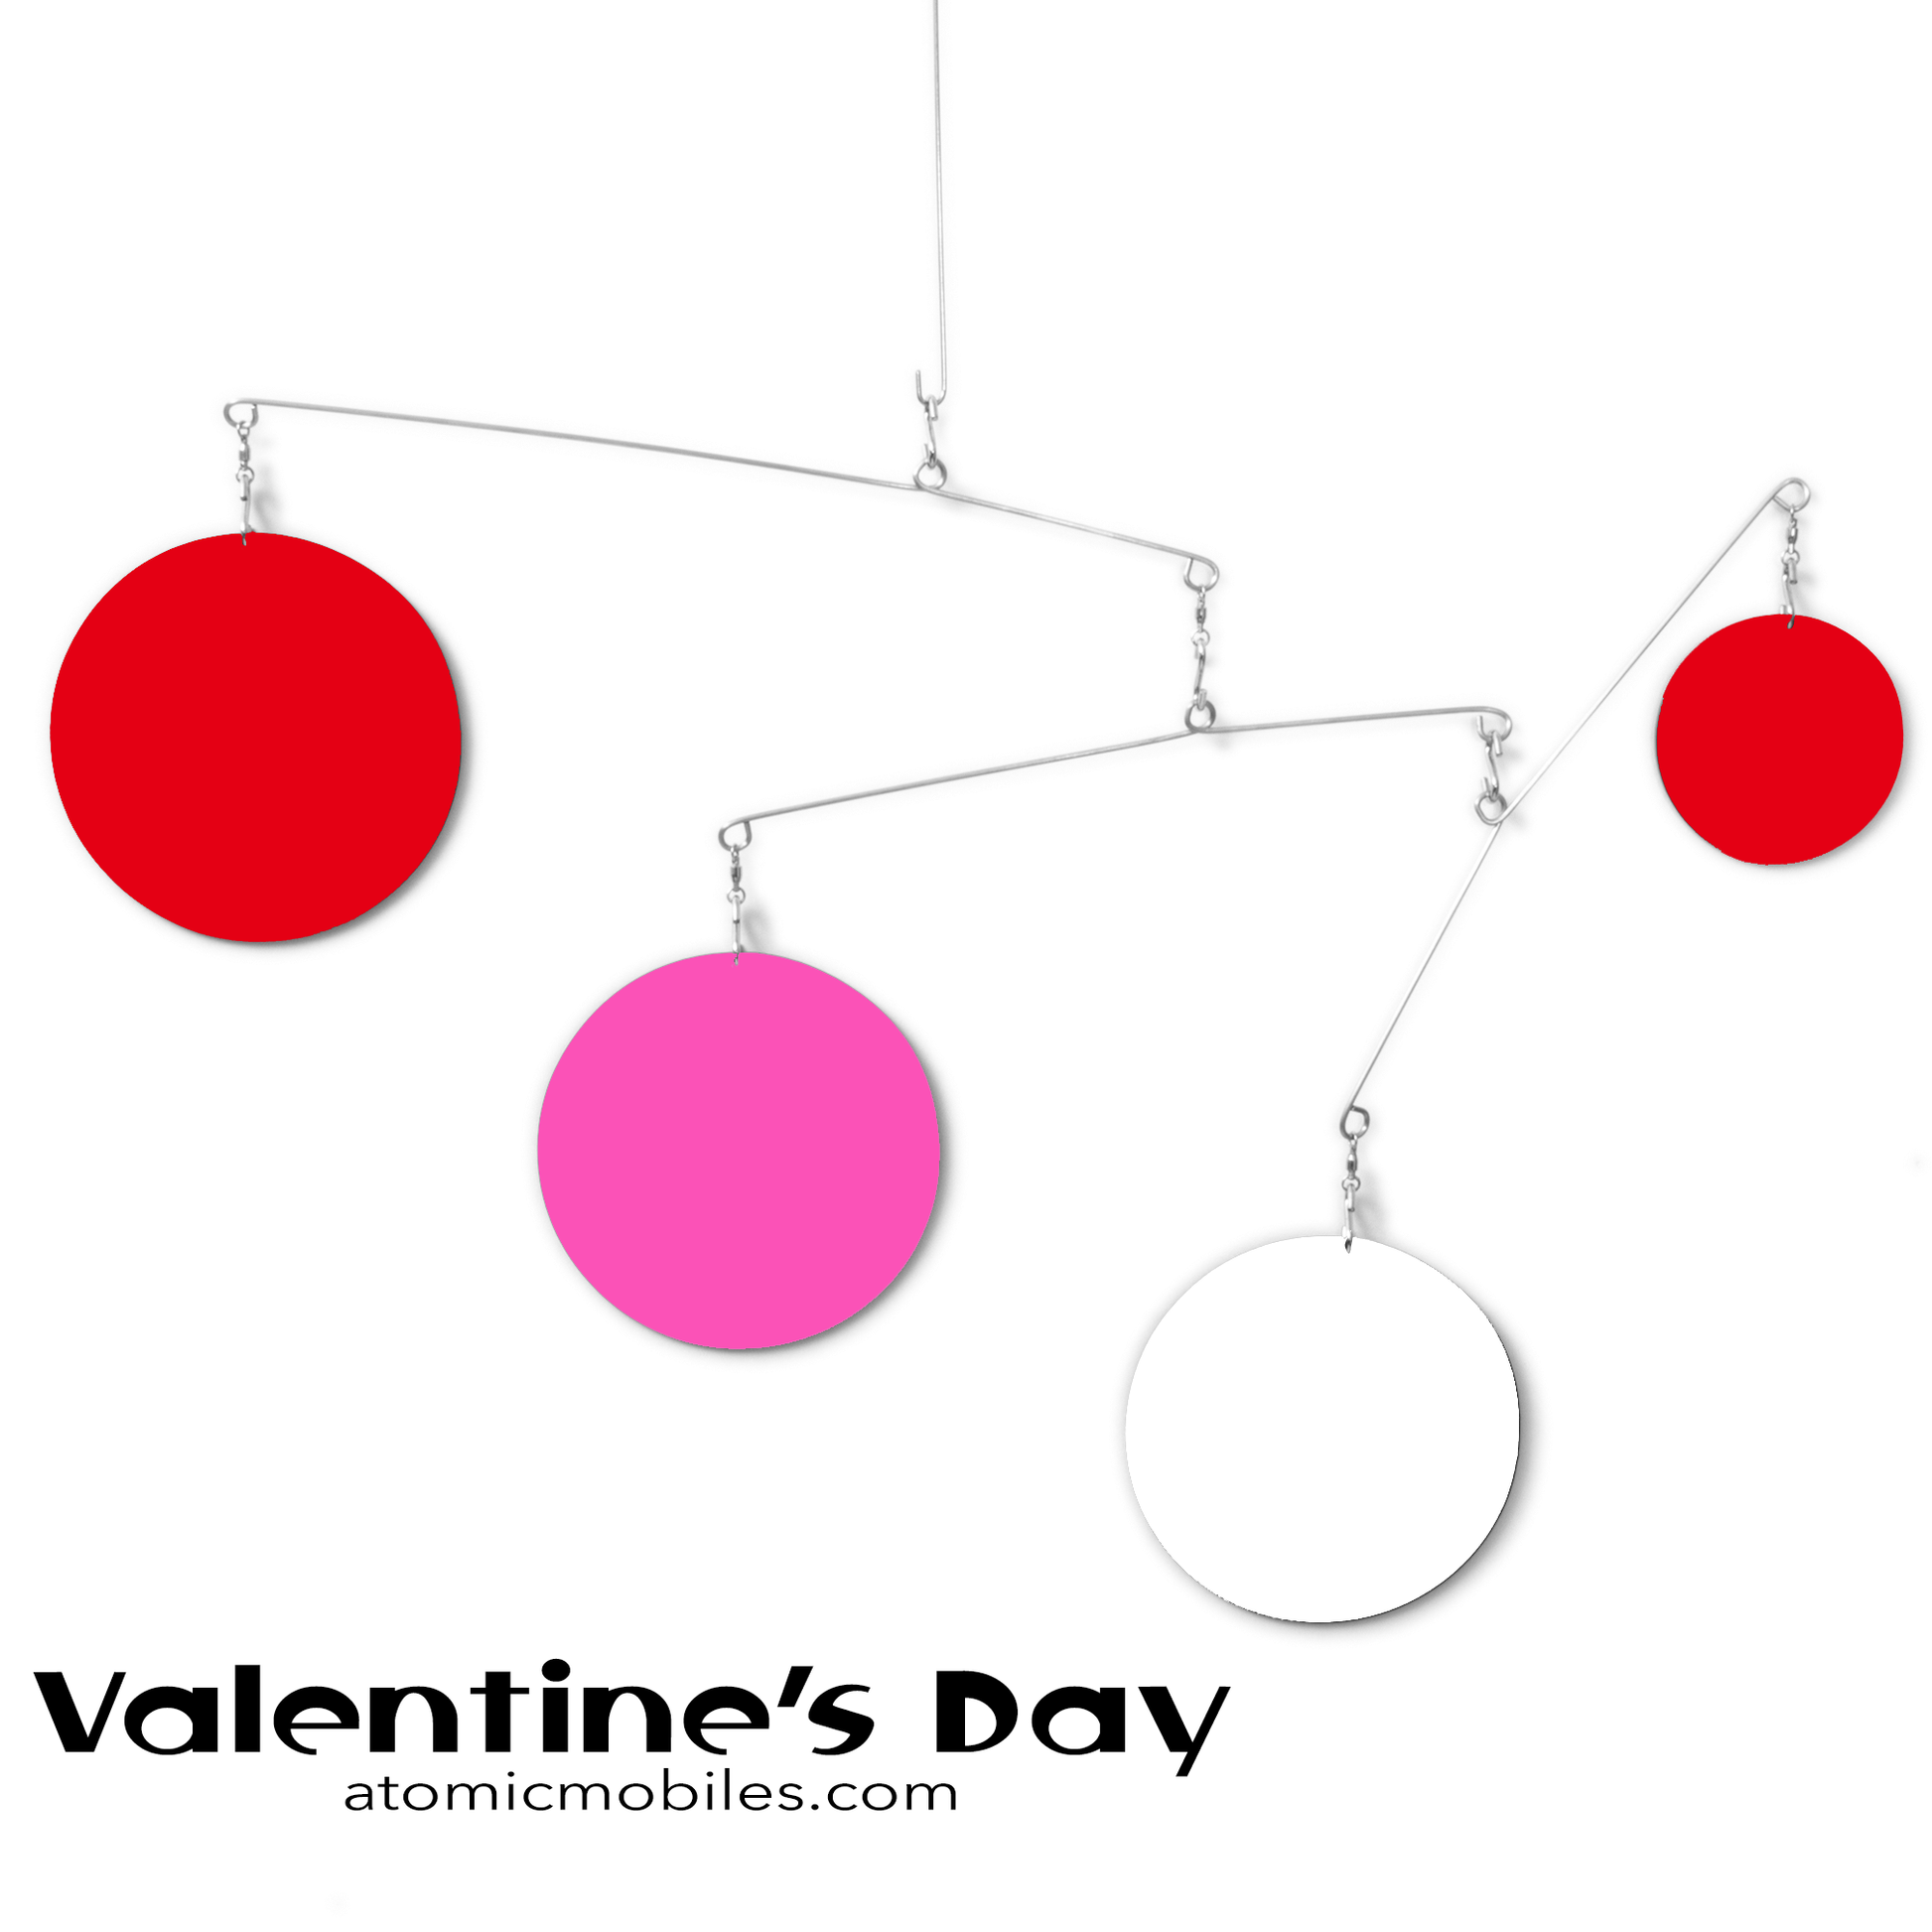 Unique Valentine's Day Decoration - kinetic hanging art mobile in Valentines colors of Red, Hot Pink, and White by AtomicMobiles.com